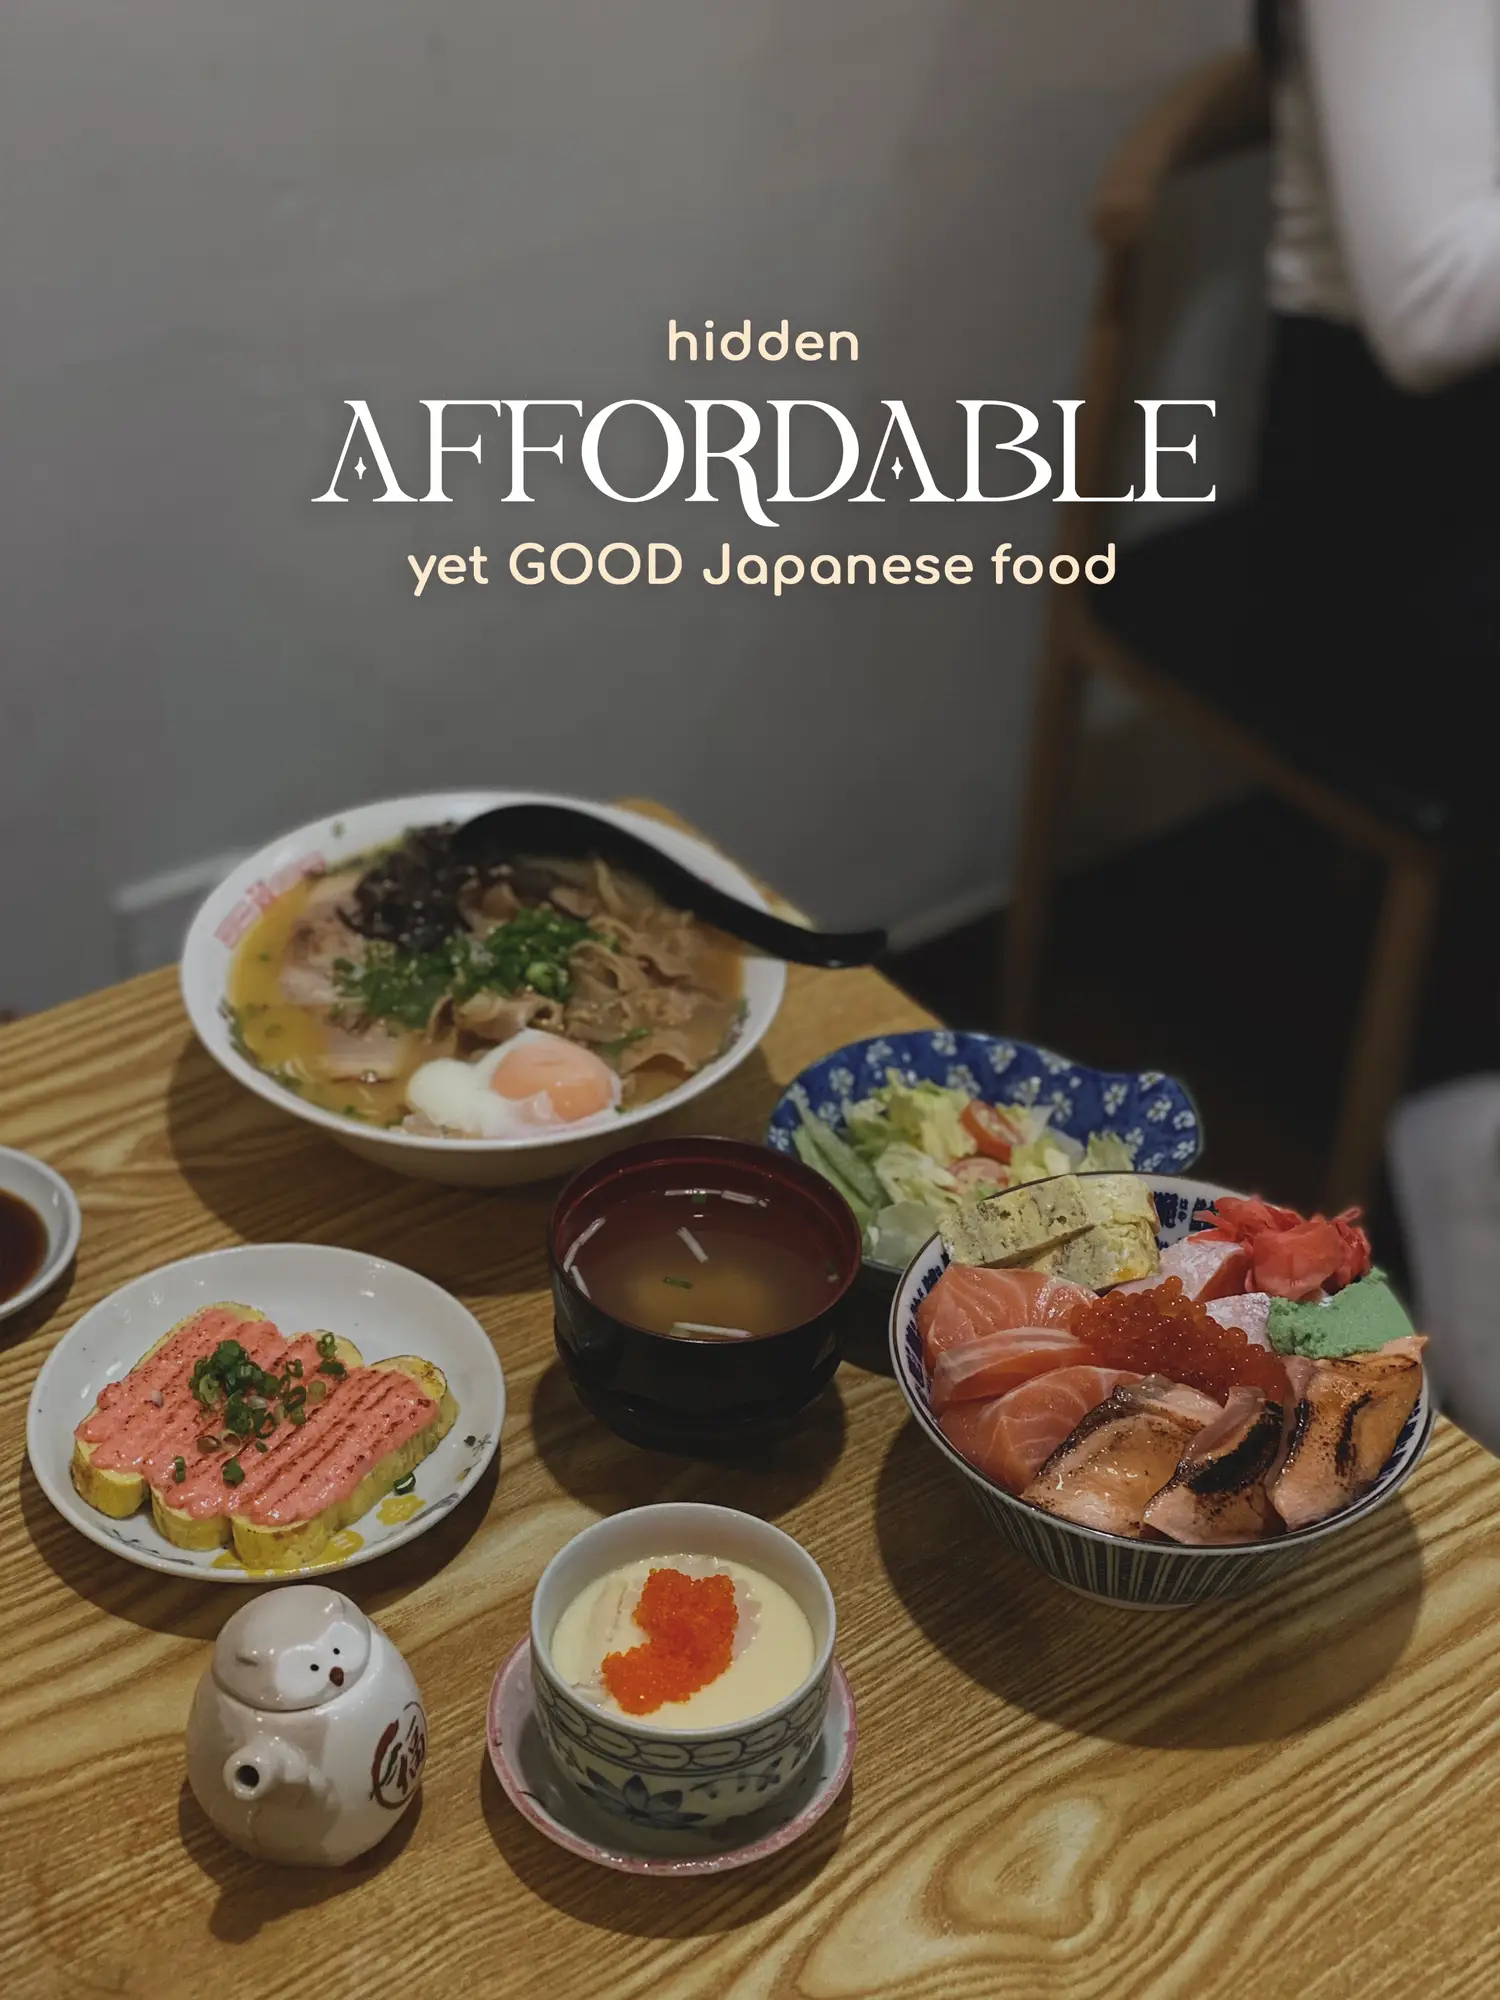 Small & Humble Japanese Food Tucked in the West's images(0)